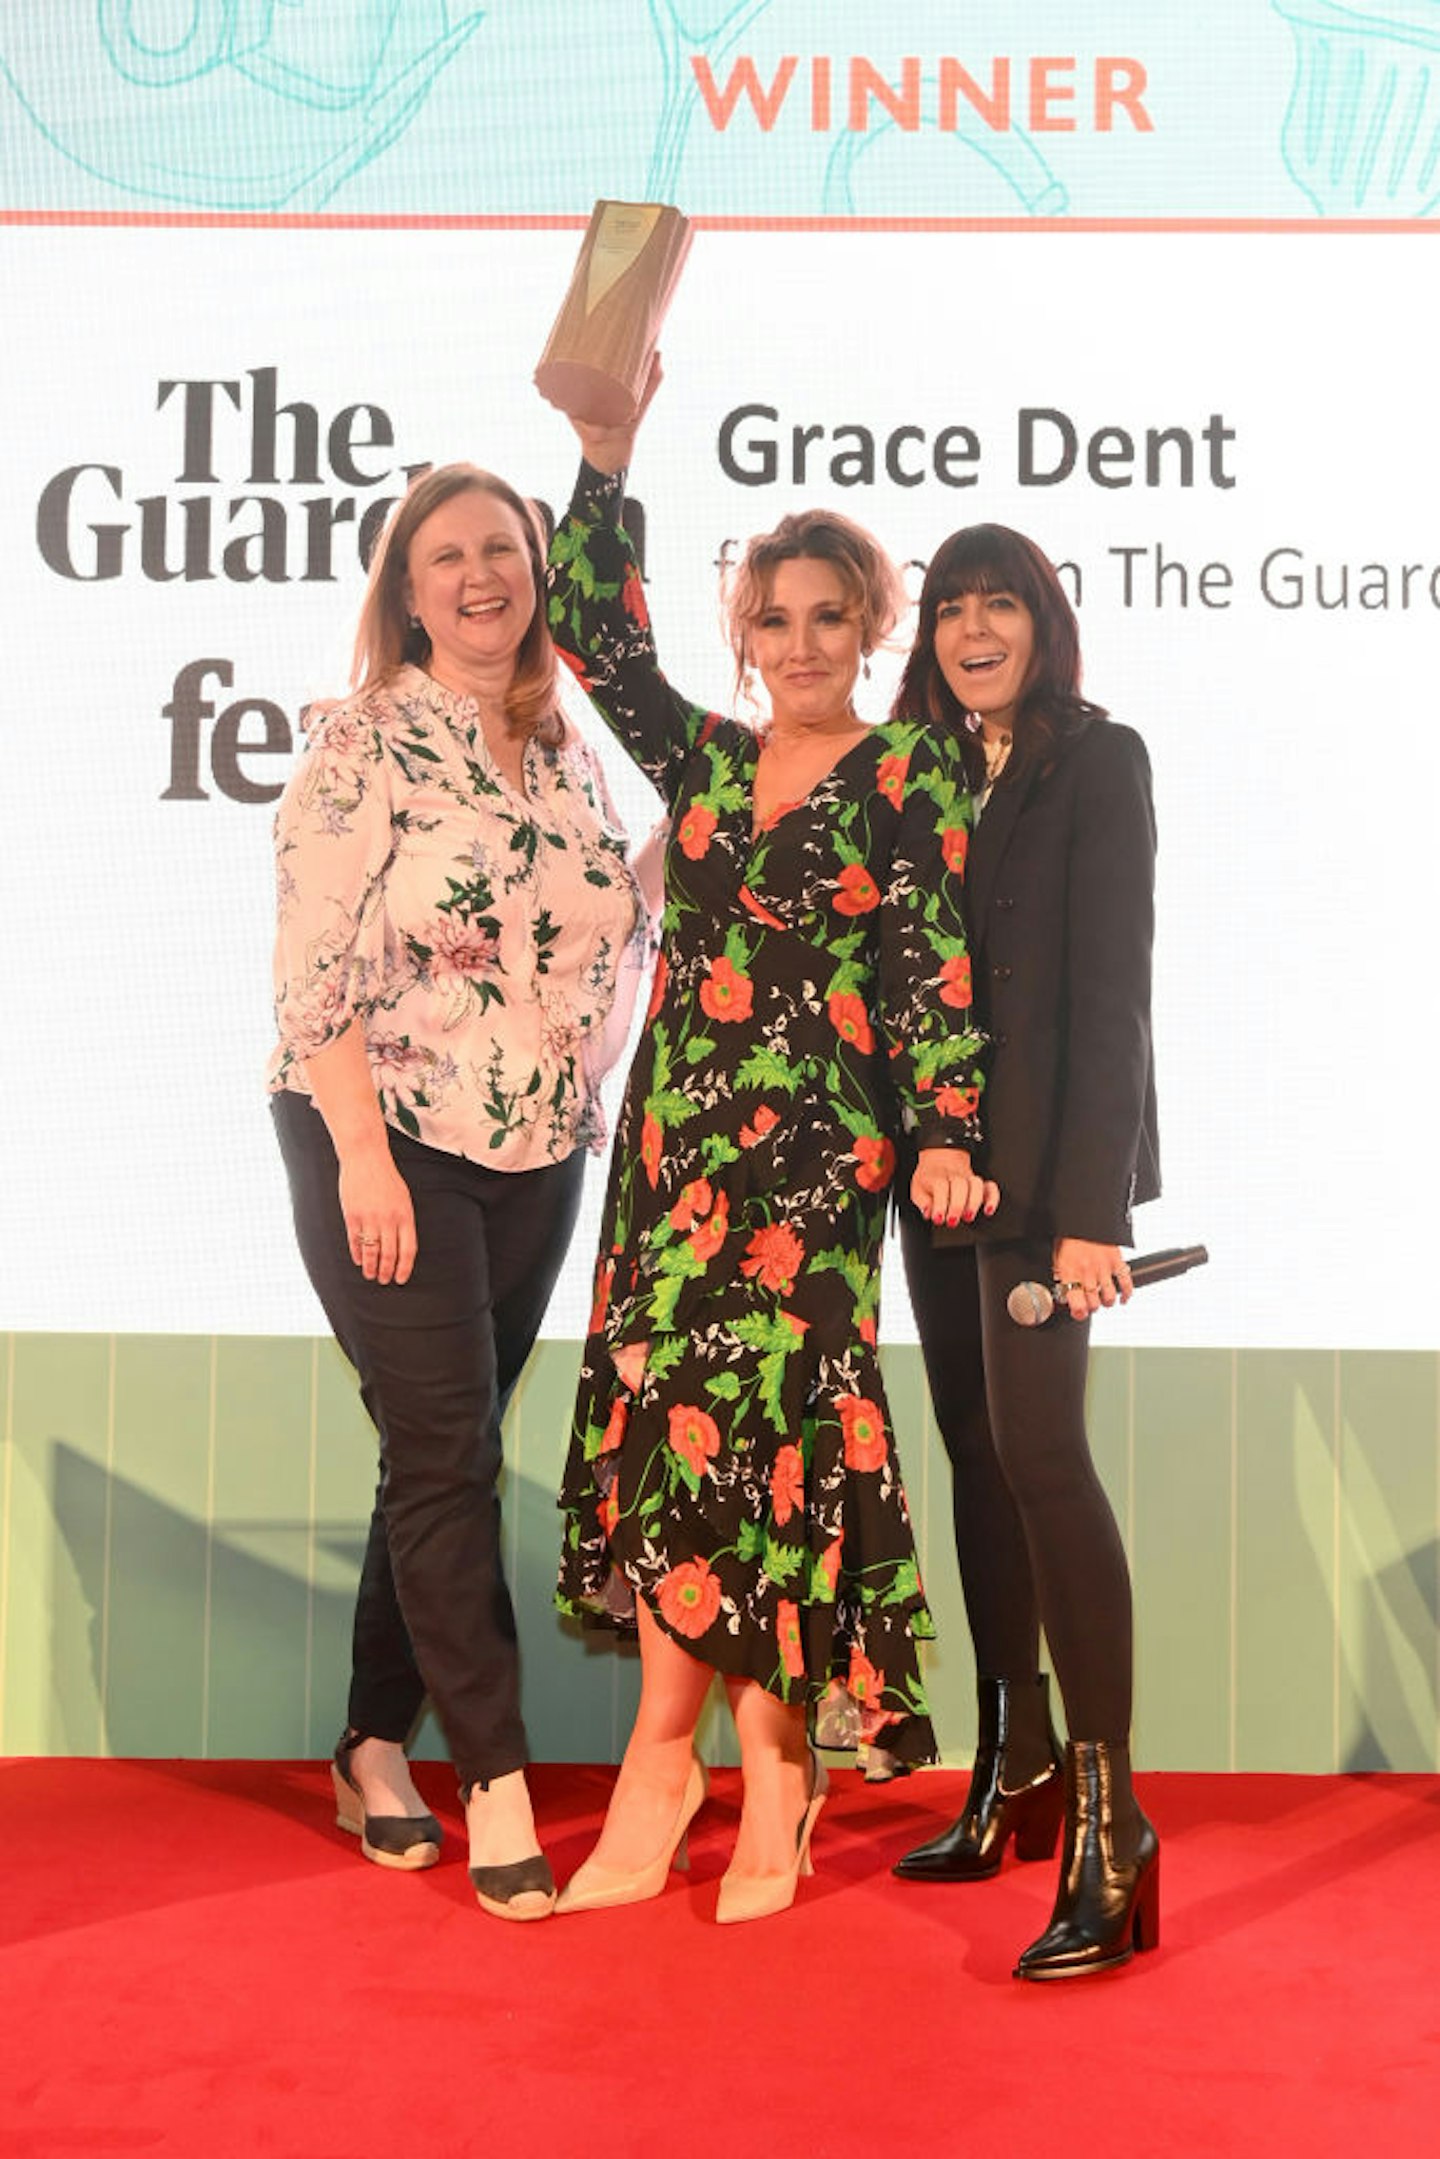 Grace Dent is presented with the Restaurant Writer Award by Angela Hartnett and Claudia Winkleman at the Fortnum & Mason Food and Drink Awards at The Royal Exchange on May 12, 2022